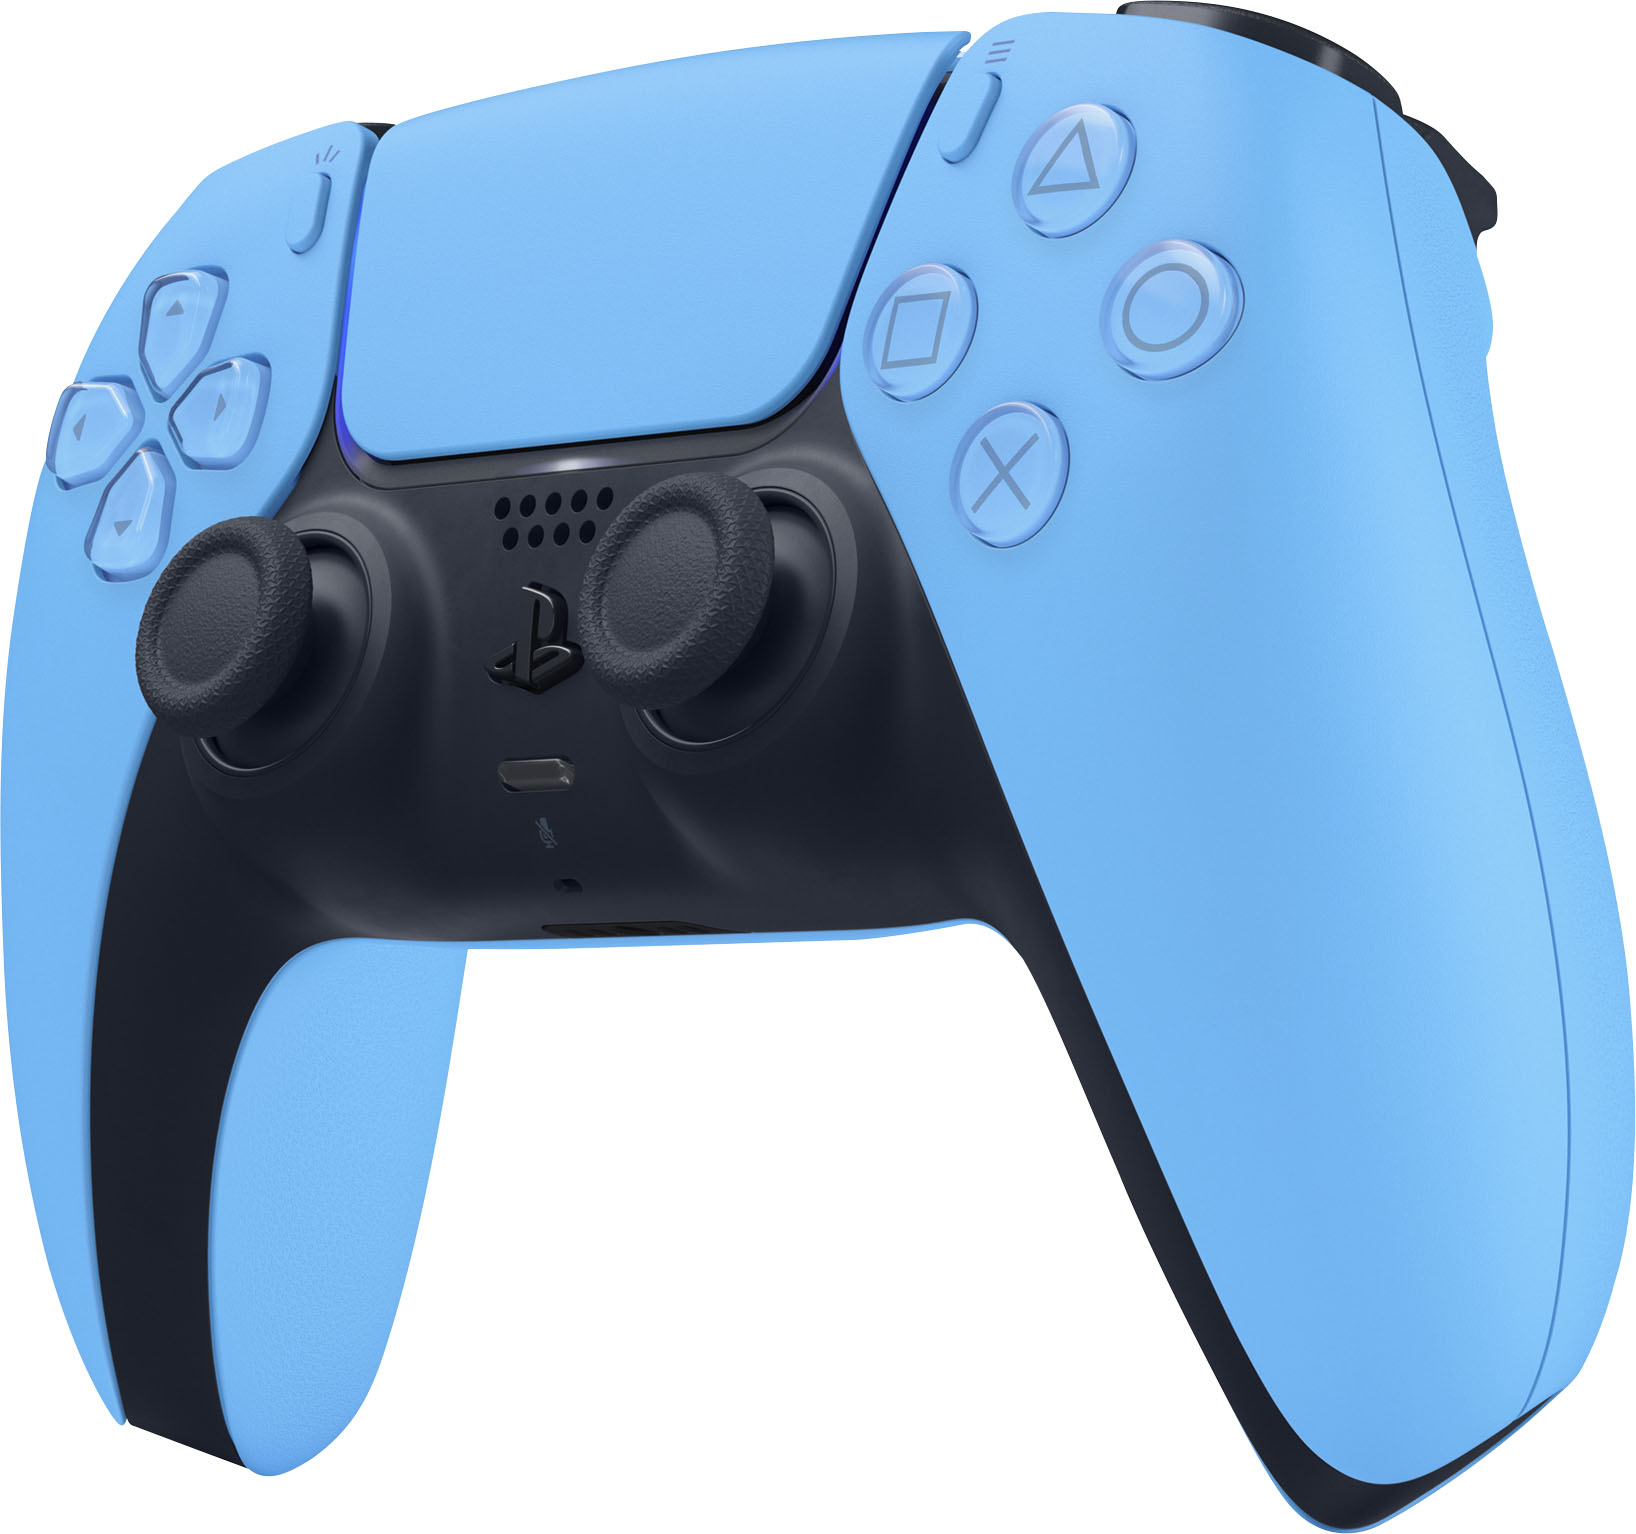 Angle View: Sony - PlayStation 5 - DualSense Wireless Controller - Starlight Blue